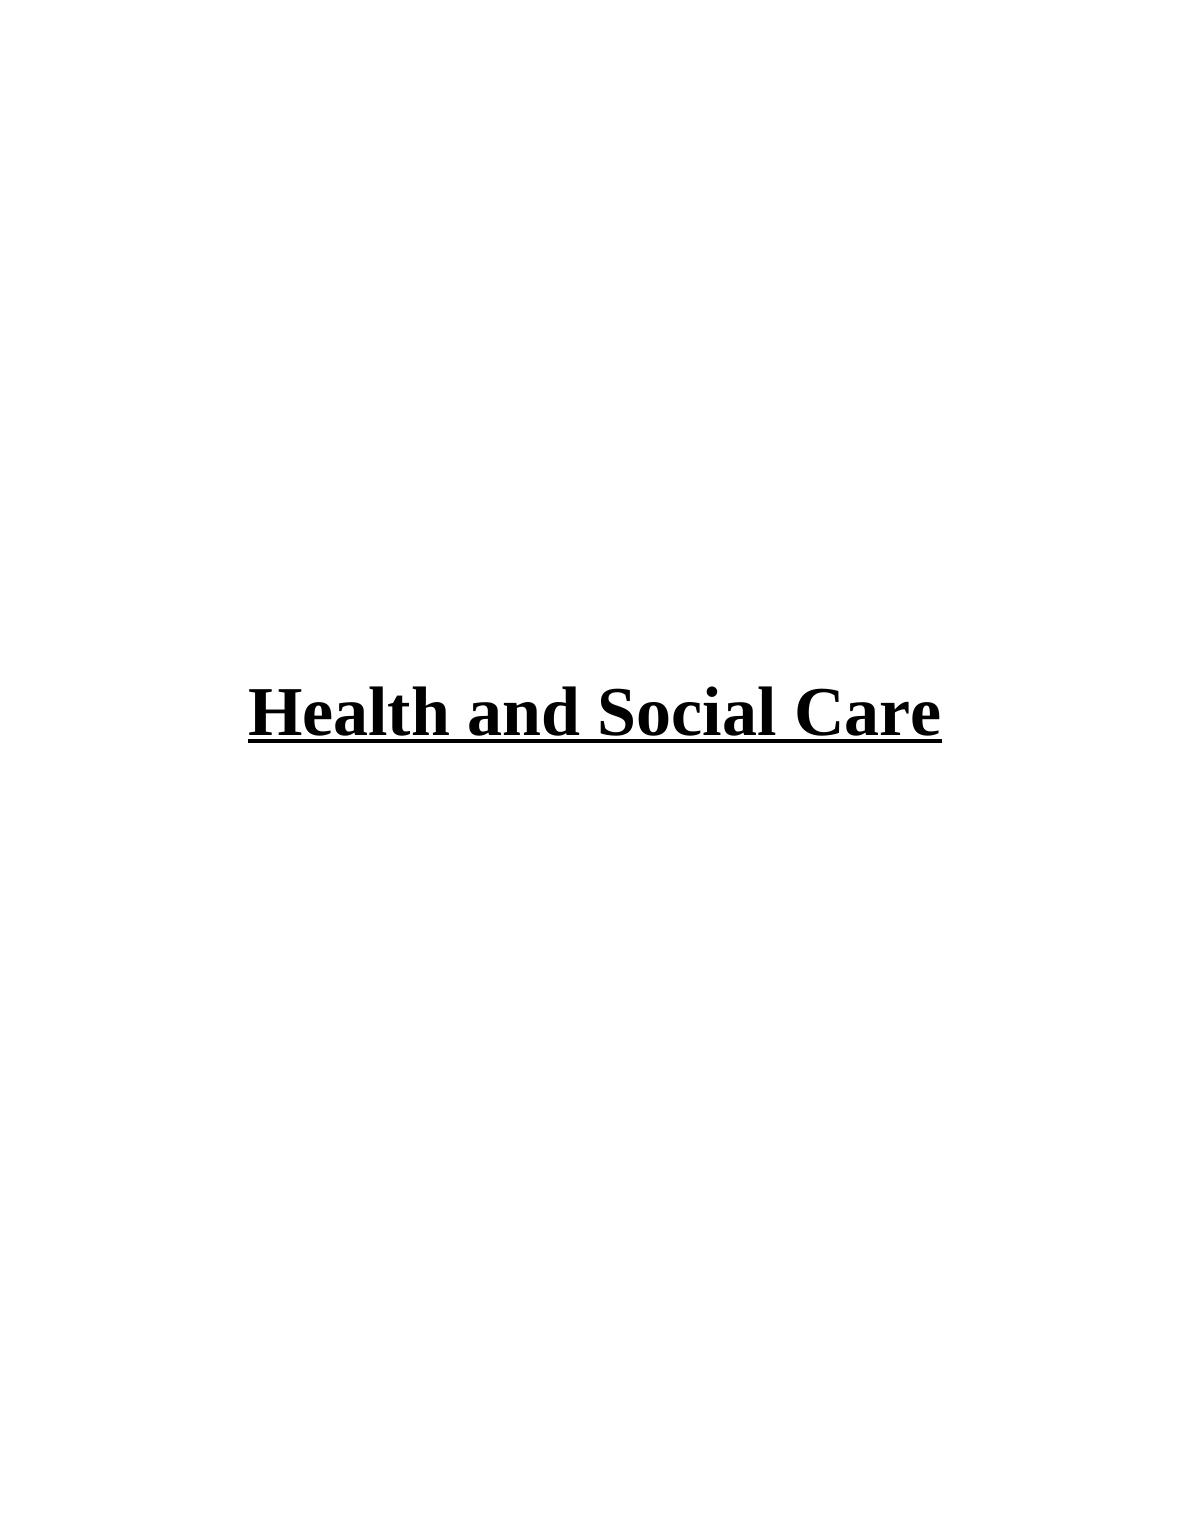 assignment health and social care